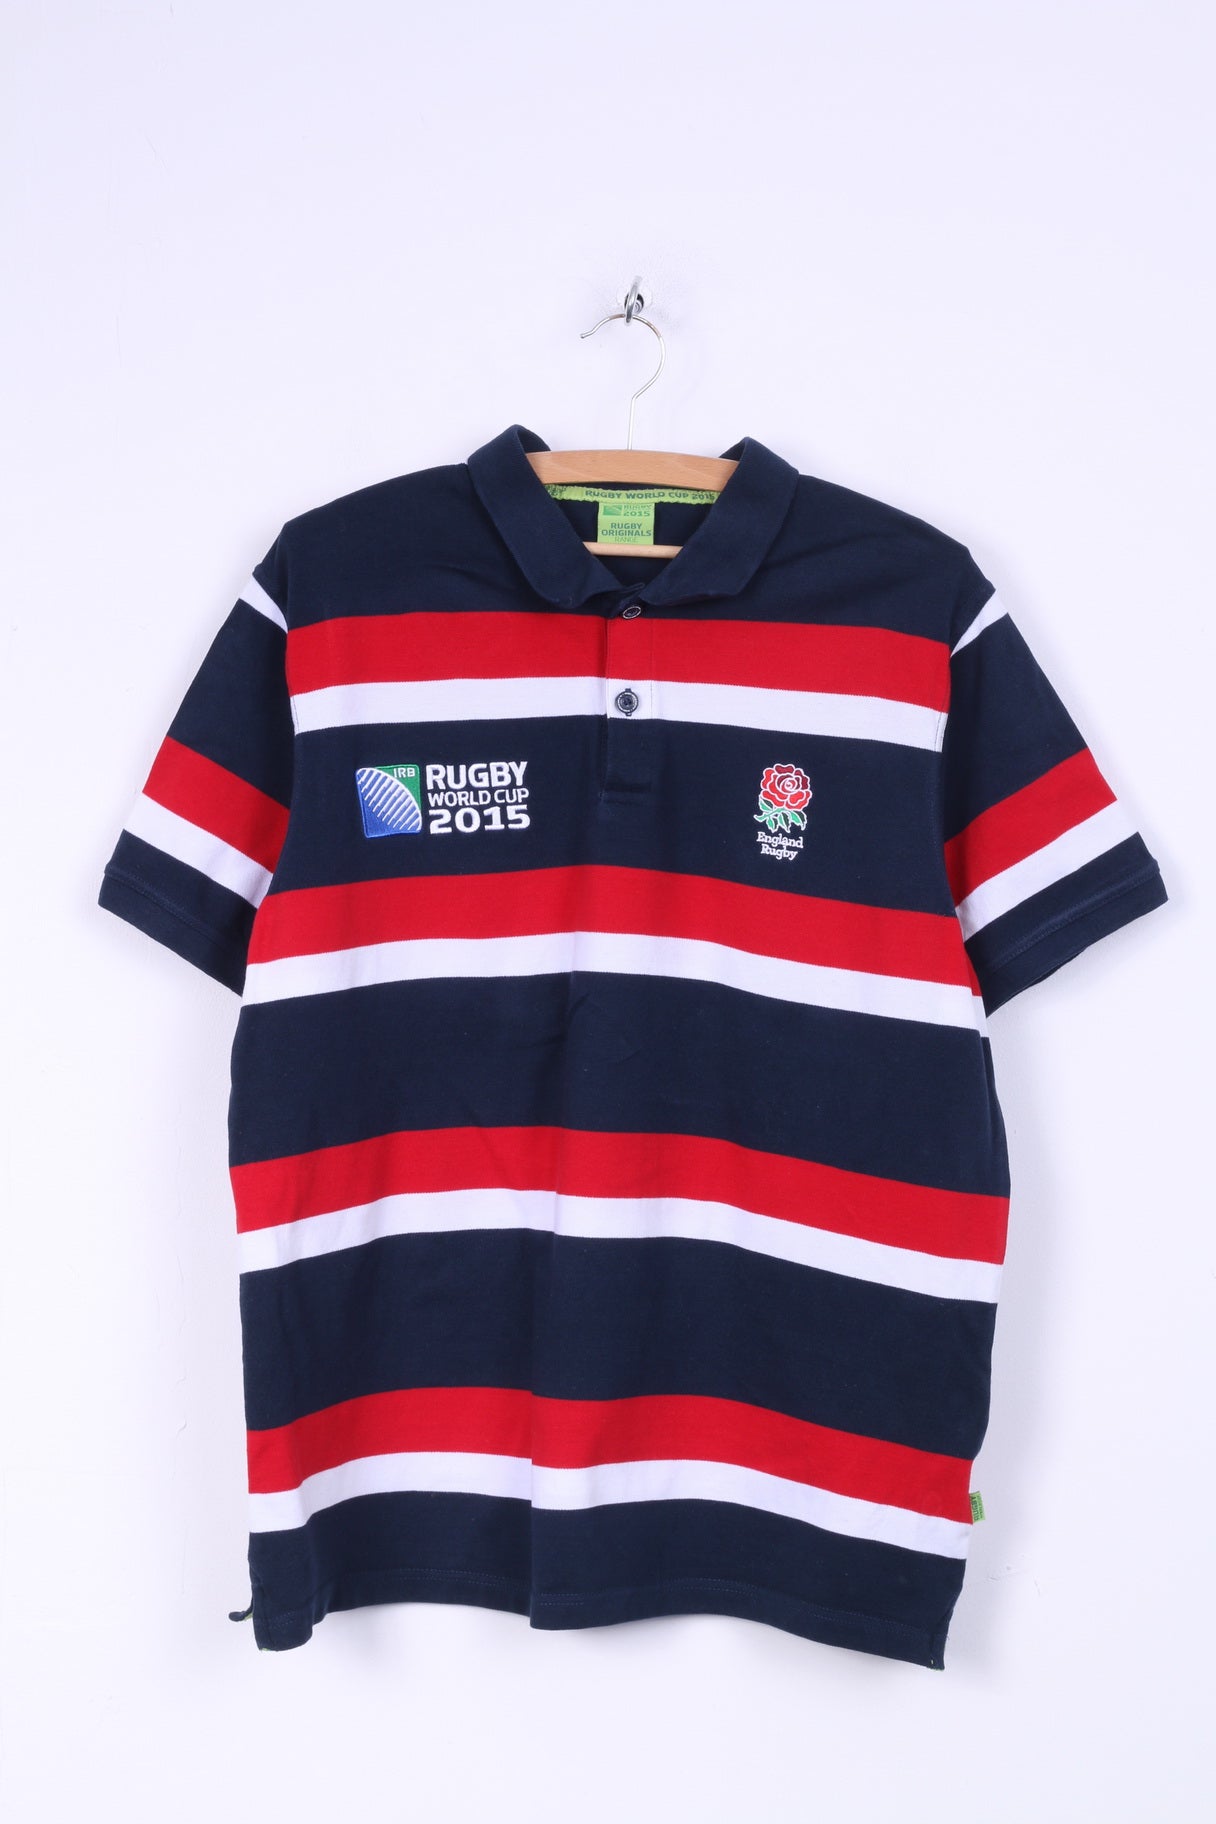 Rugby World Cup 2015 Mens XL Polo Shirt Navy Striped Cotton Blue Striped Detailed Buttons